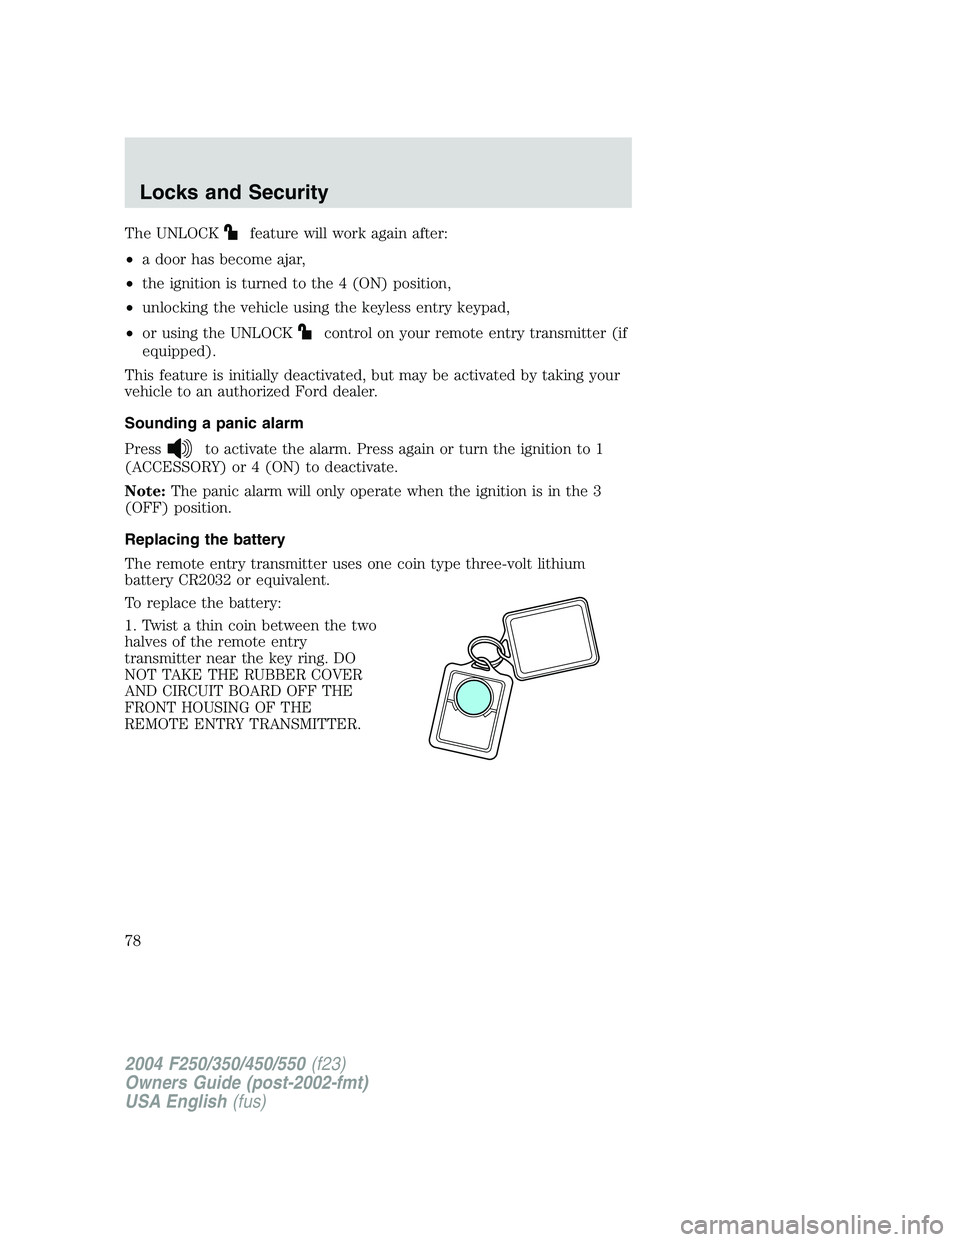 FORD F250 2004  Owners Manual The UNLOCKfeature will work again after:
•a door has become ajar,
•the ignition is turned to the 4 (ON) position,
•unlocking the vehicle using the keyless entry keypad,
•or using the UNLOCK
co